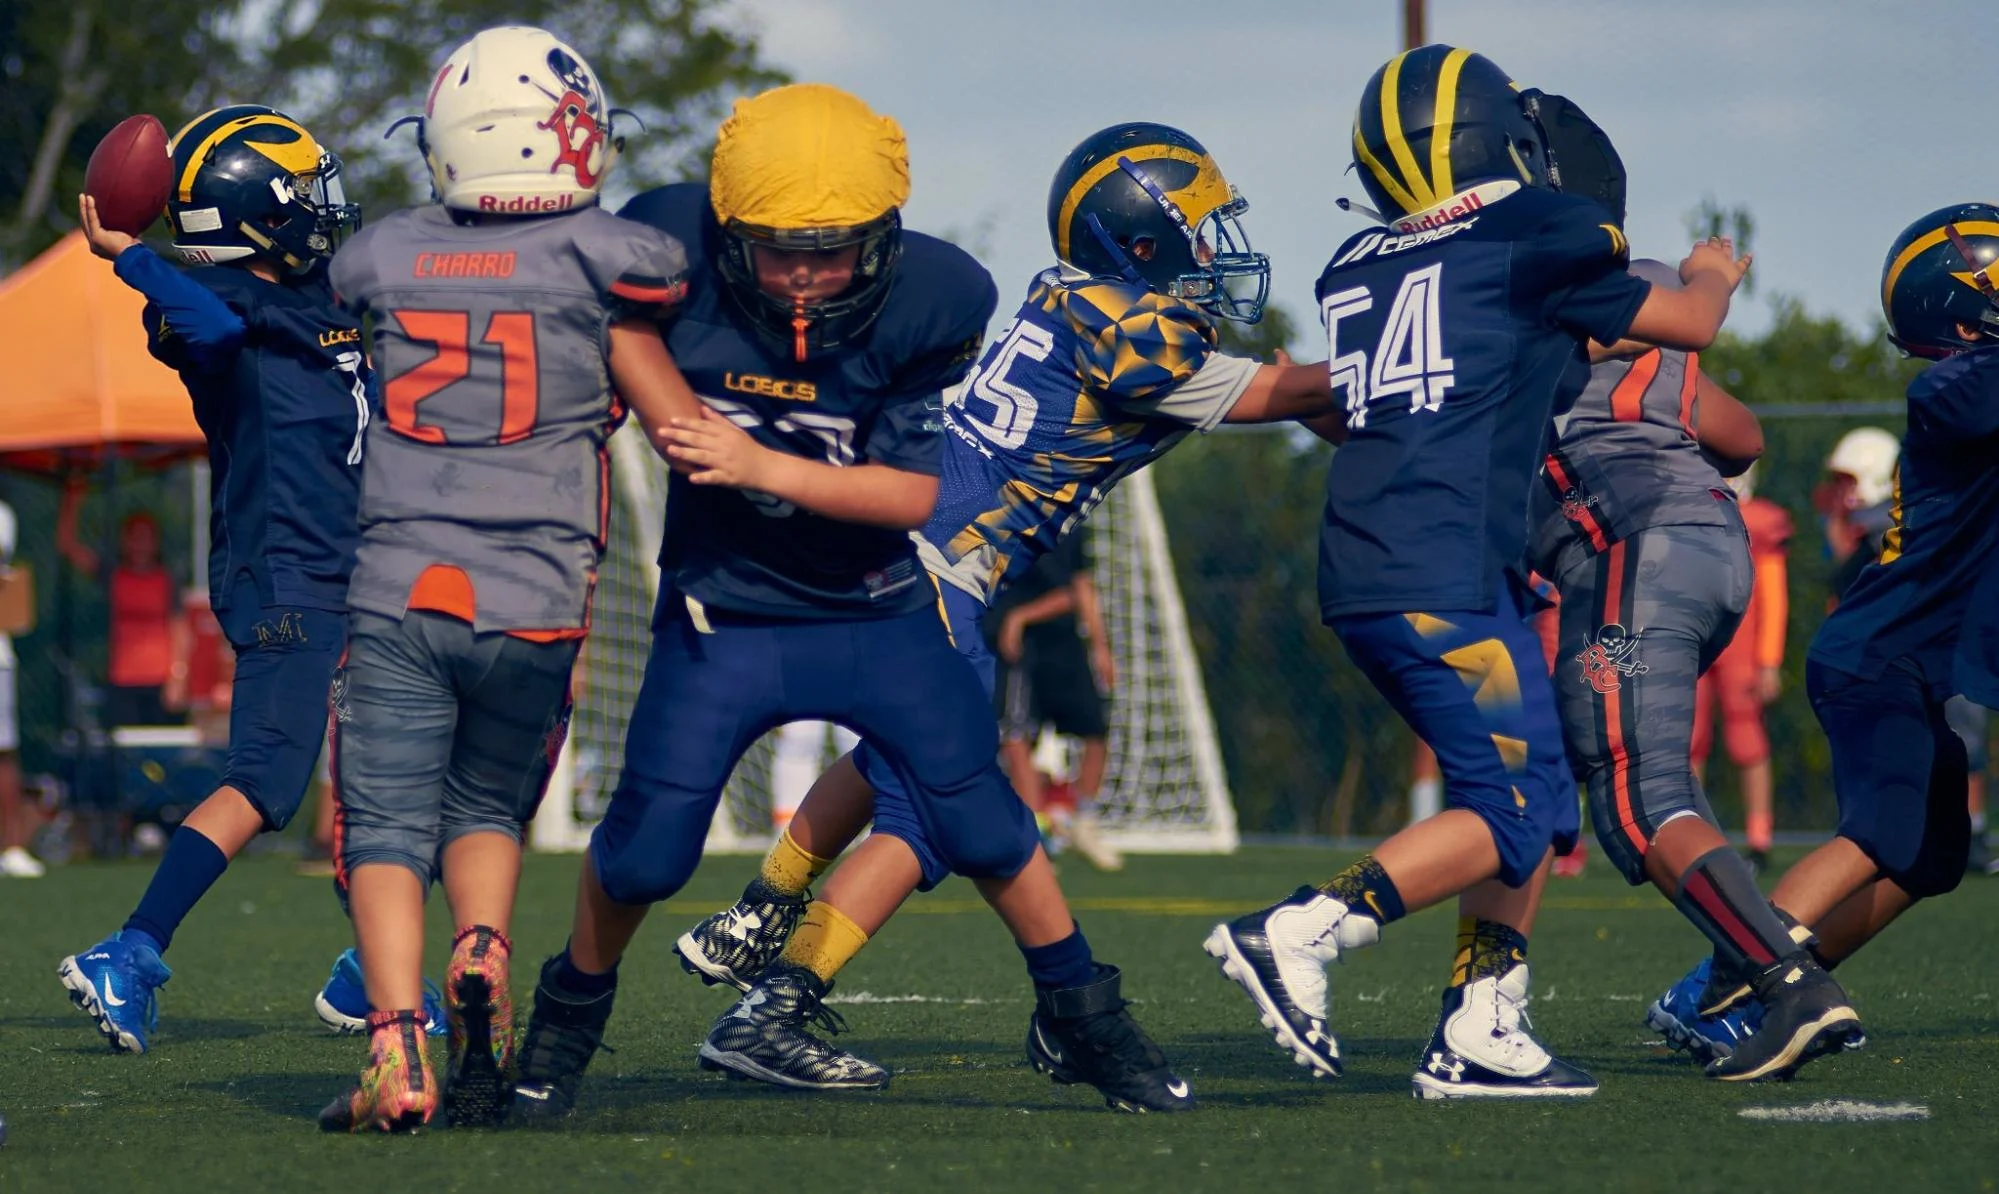 a youth football player passing the ball